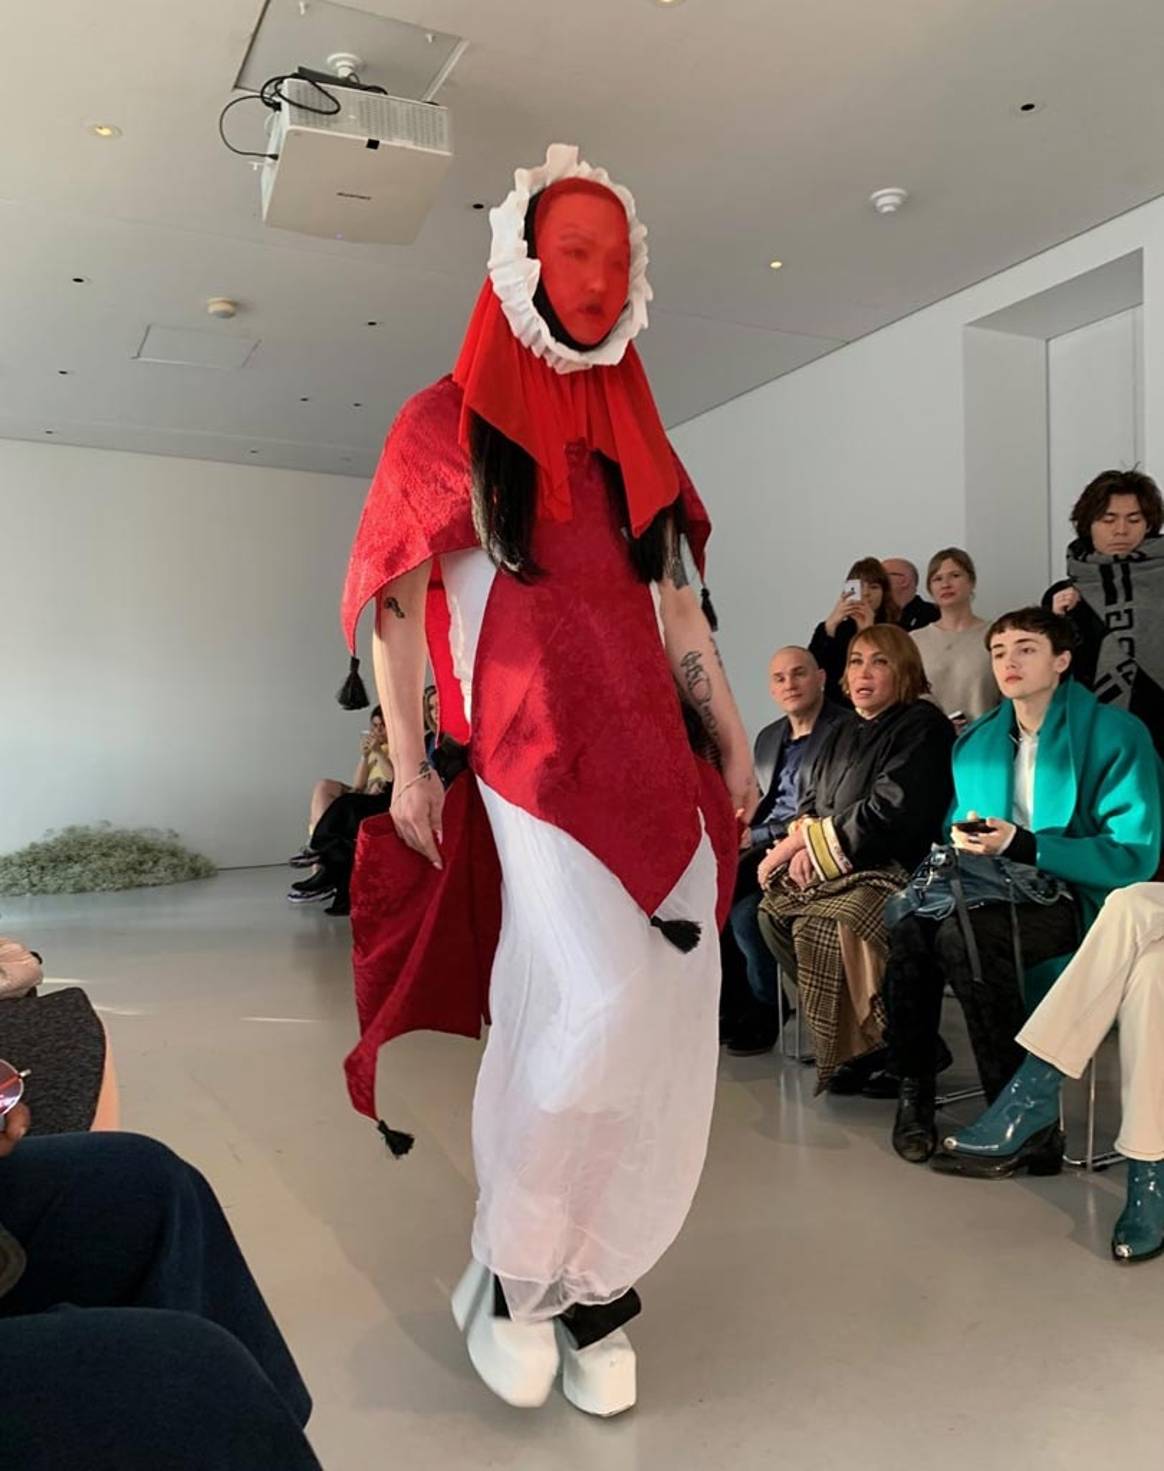 Gogo Graham’s AW19 femme fatale is softly powerful